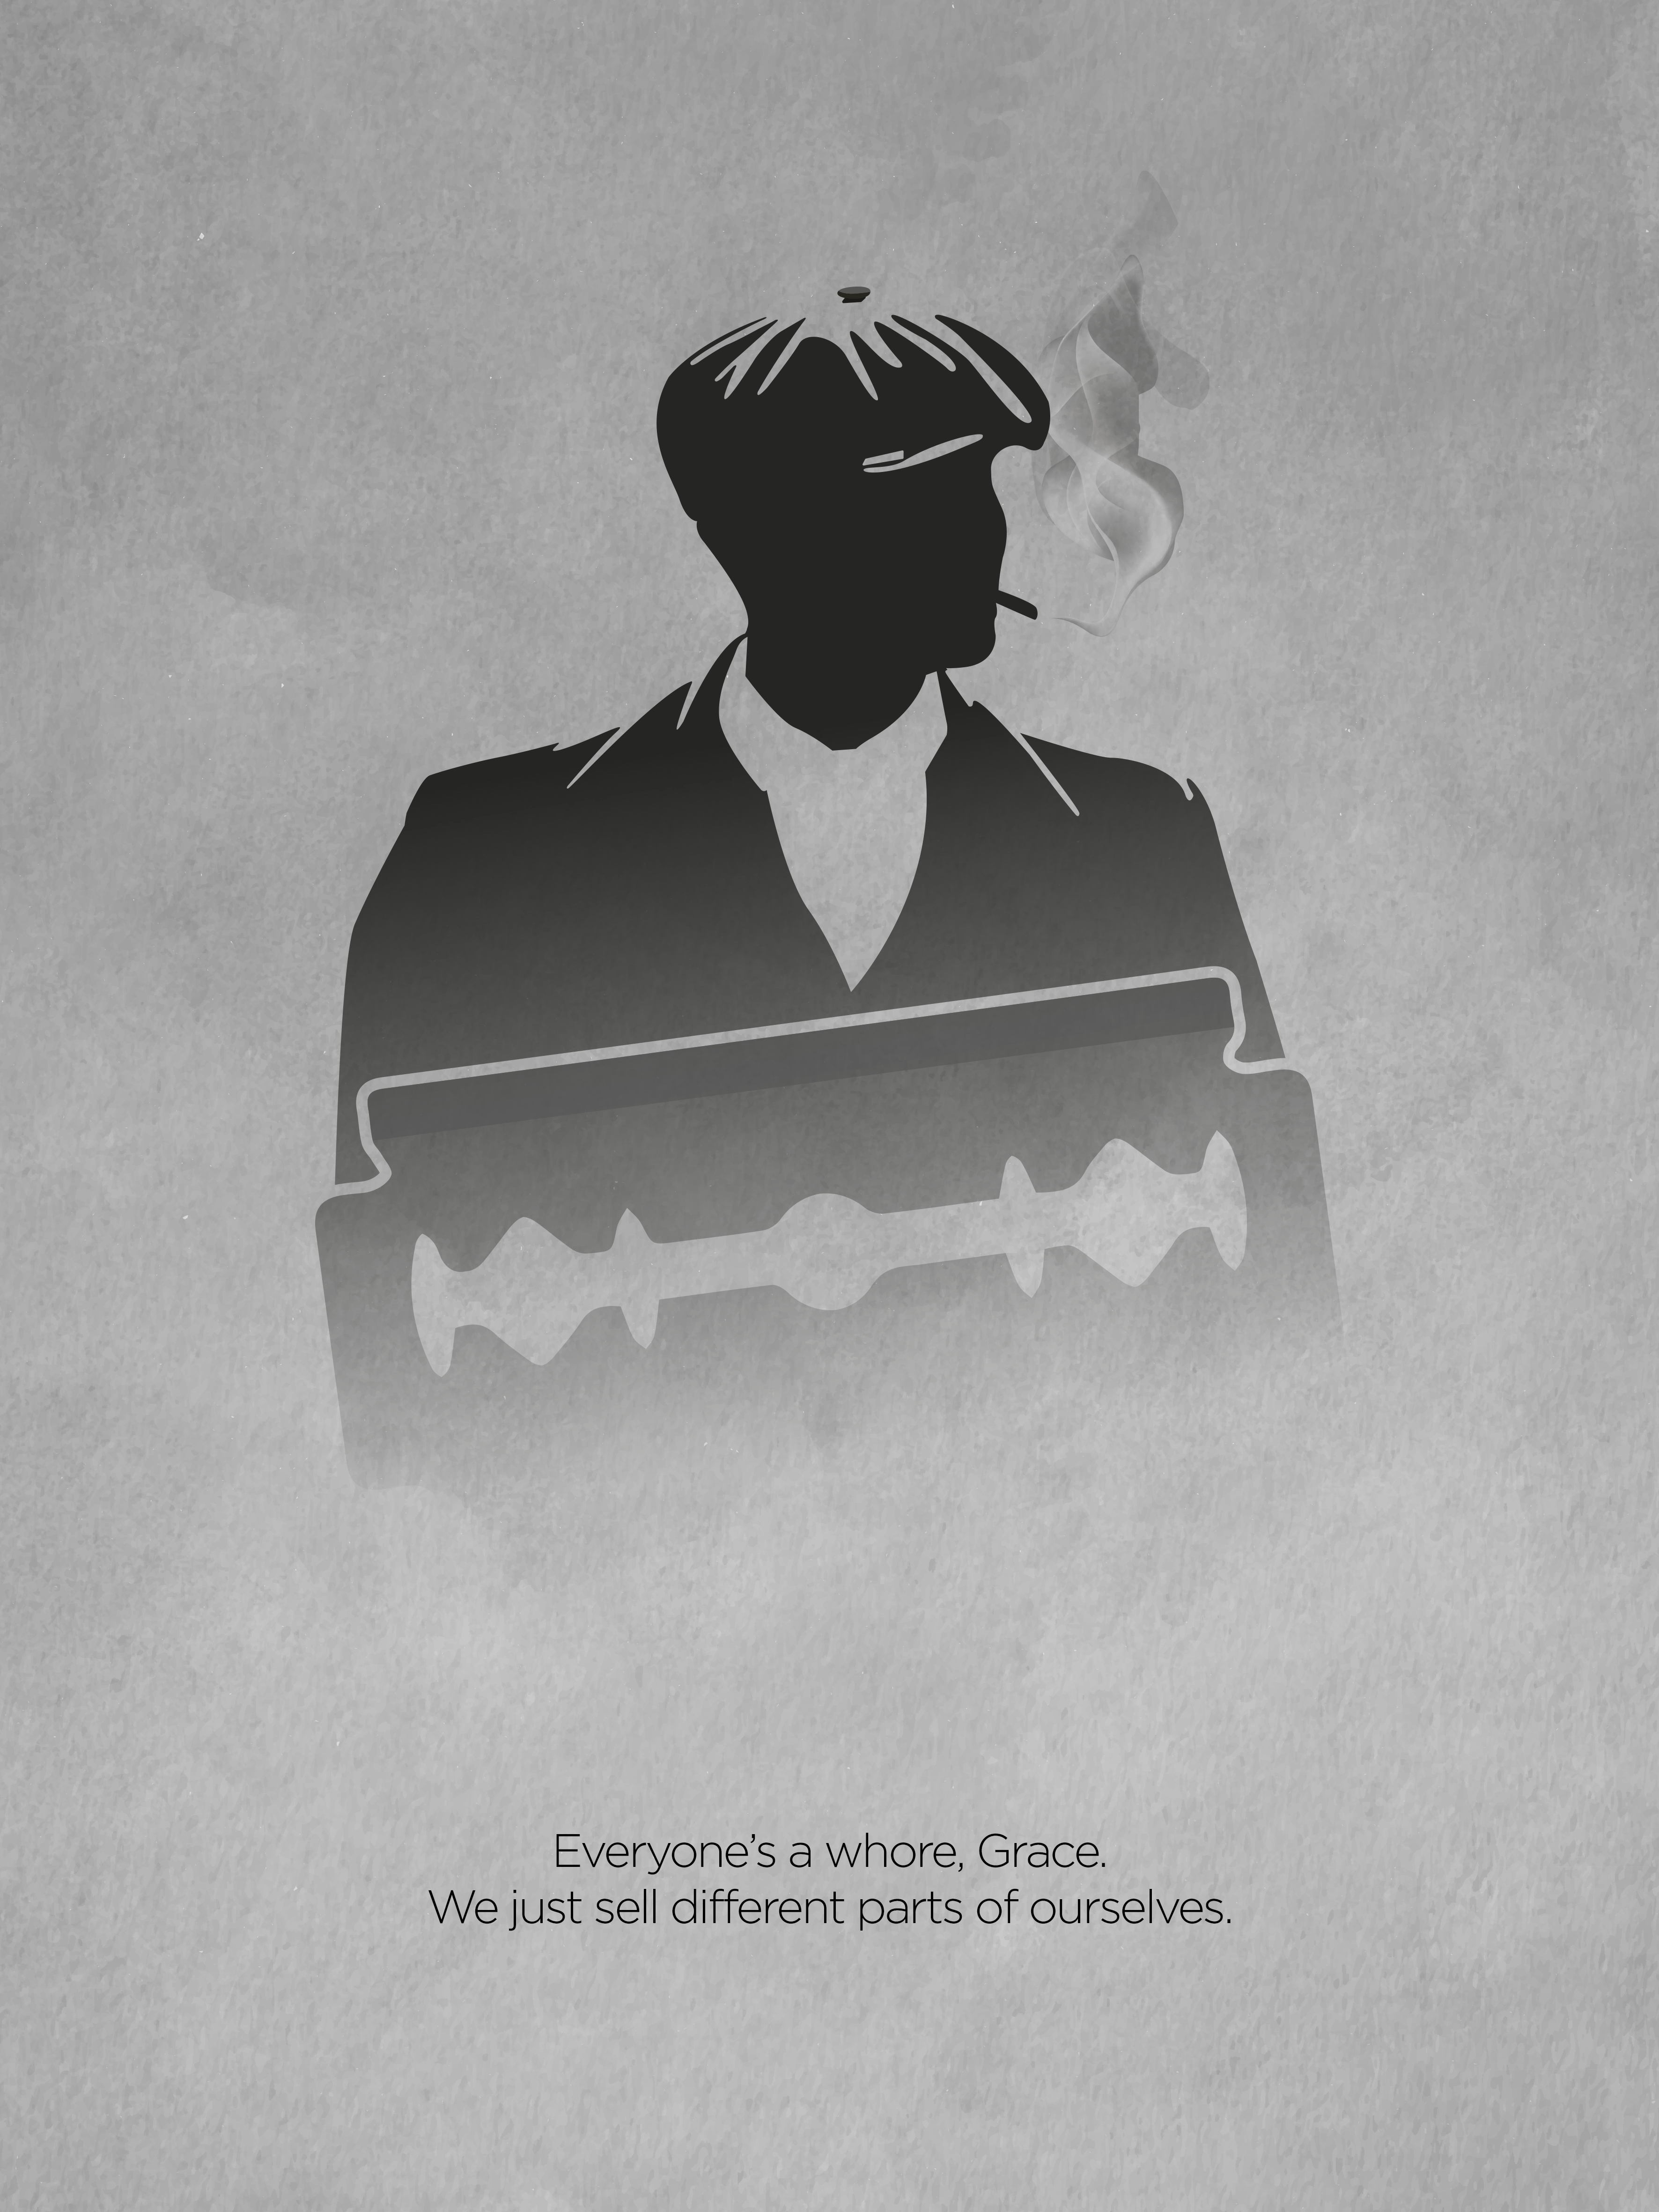 Peaky Blinders serie minimalist poster and quote, with Thomas Shelby shape.